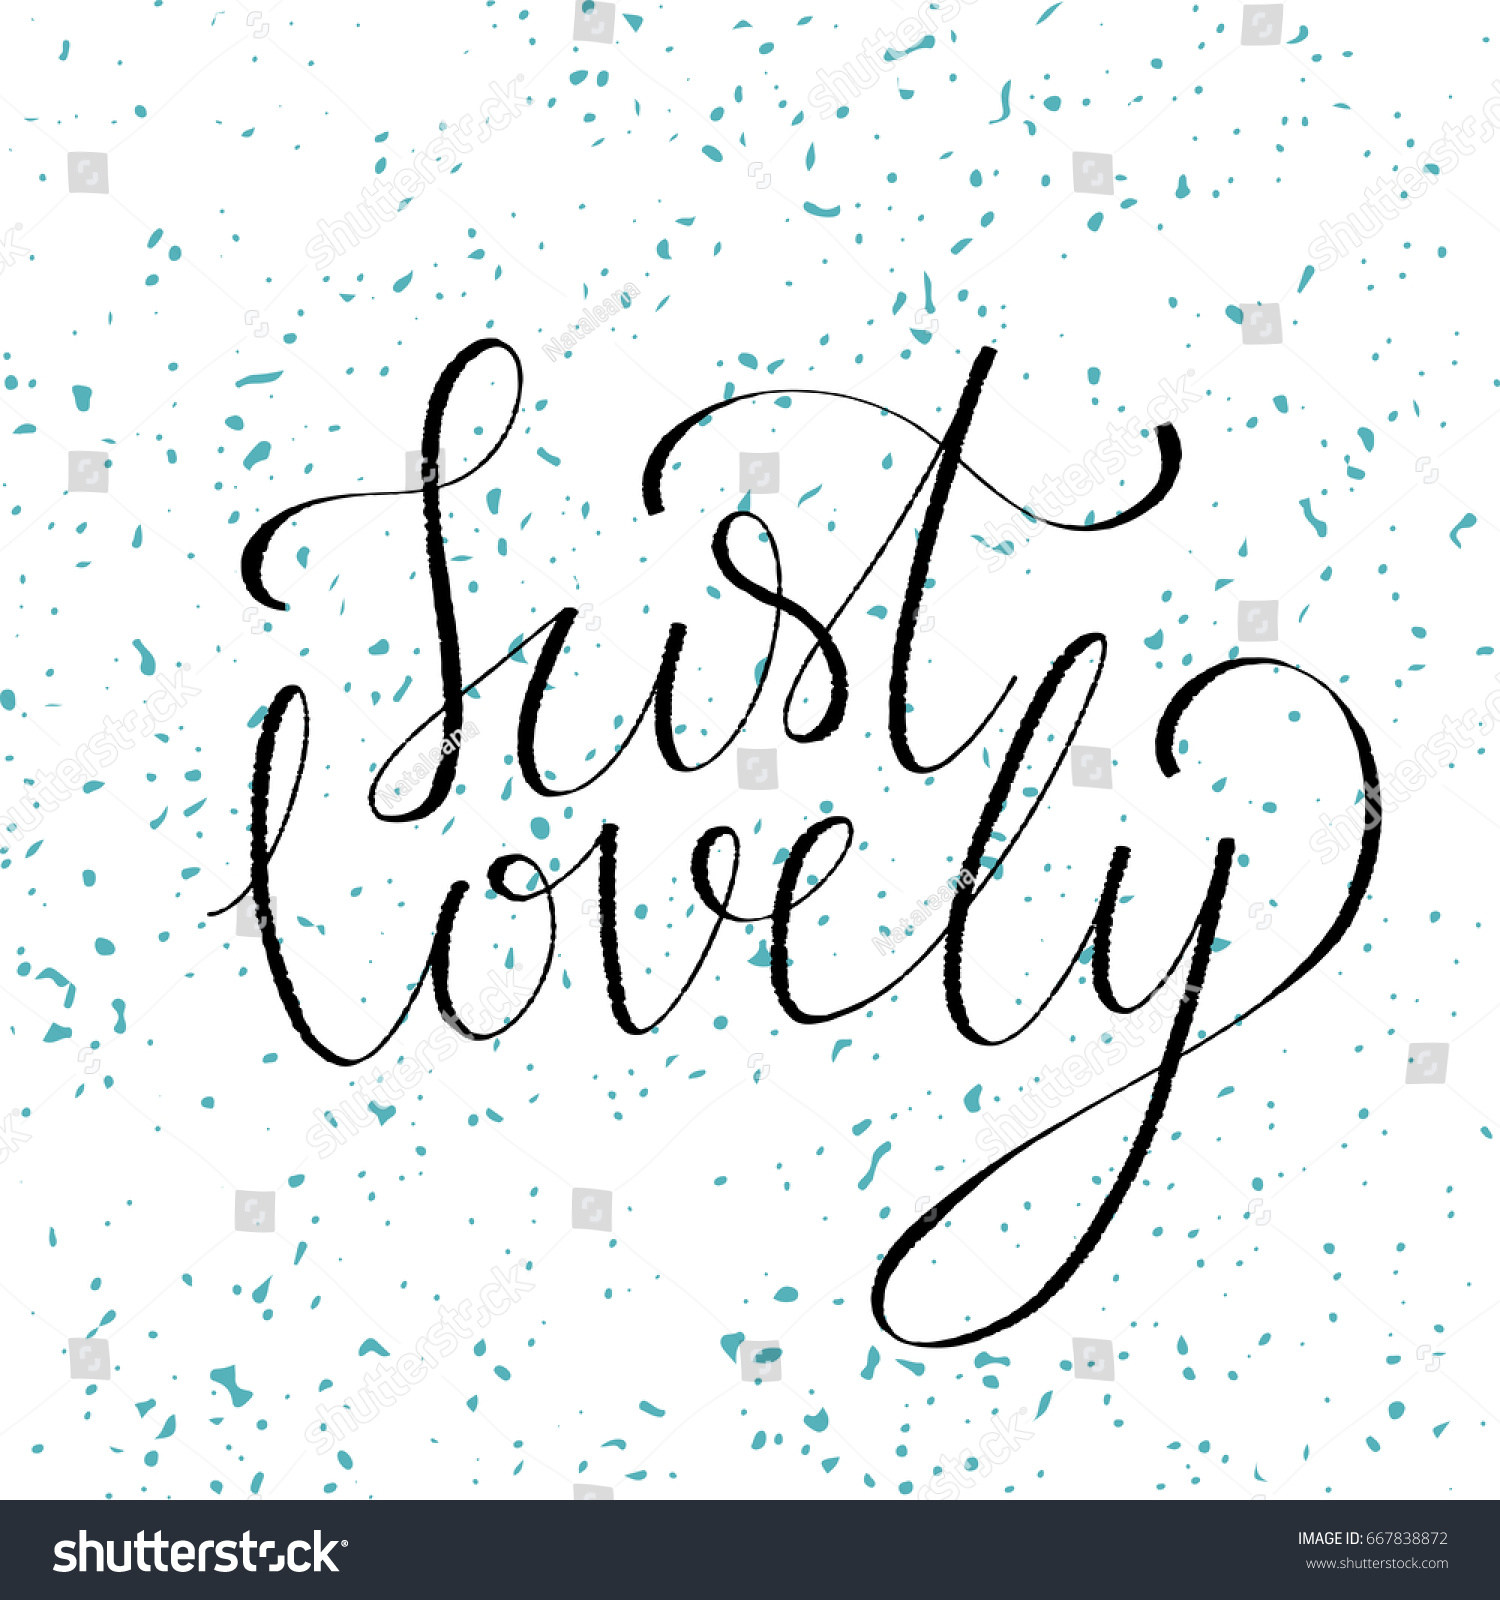 Just Lovely Hand Written Font Abstract Stock Vector (Royalty Free ...